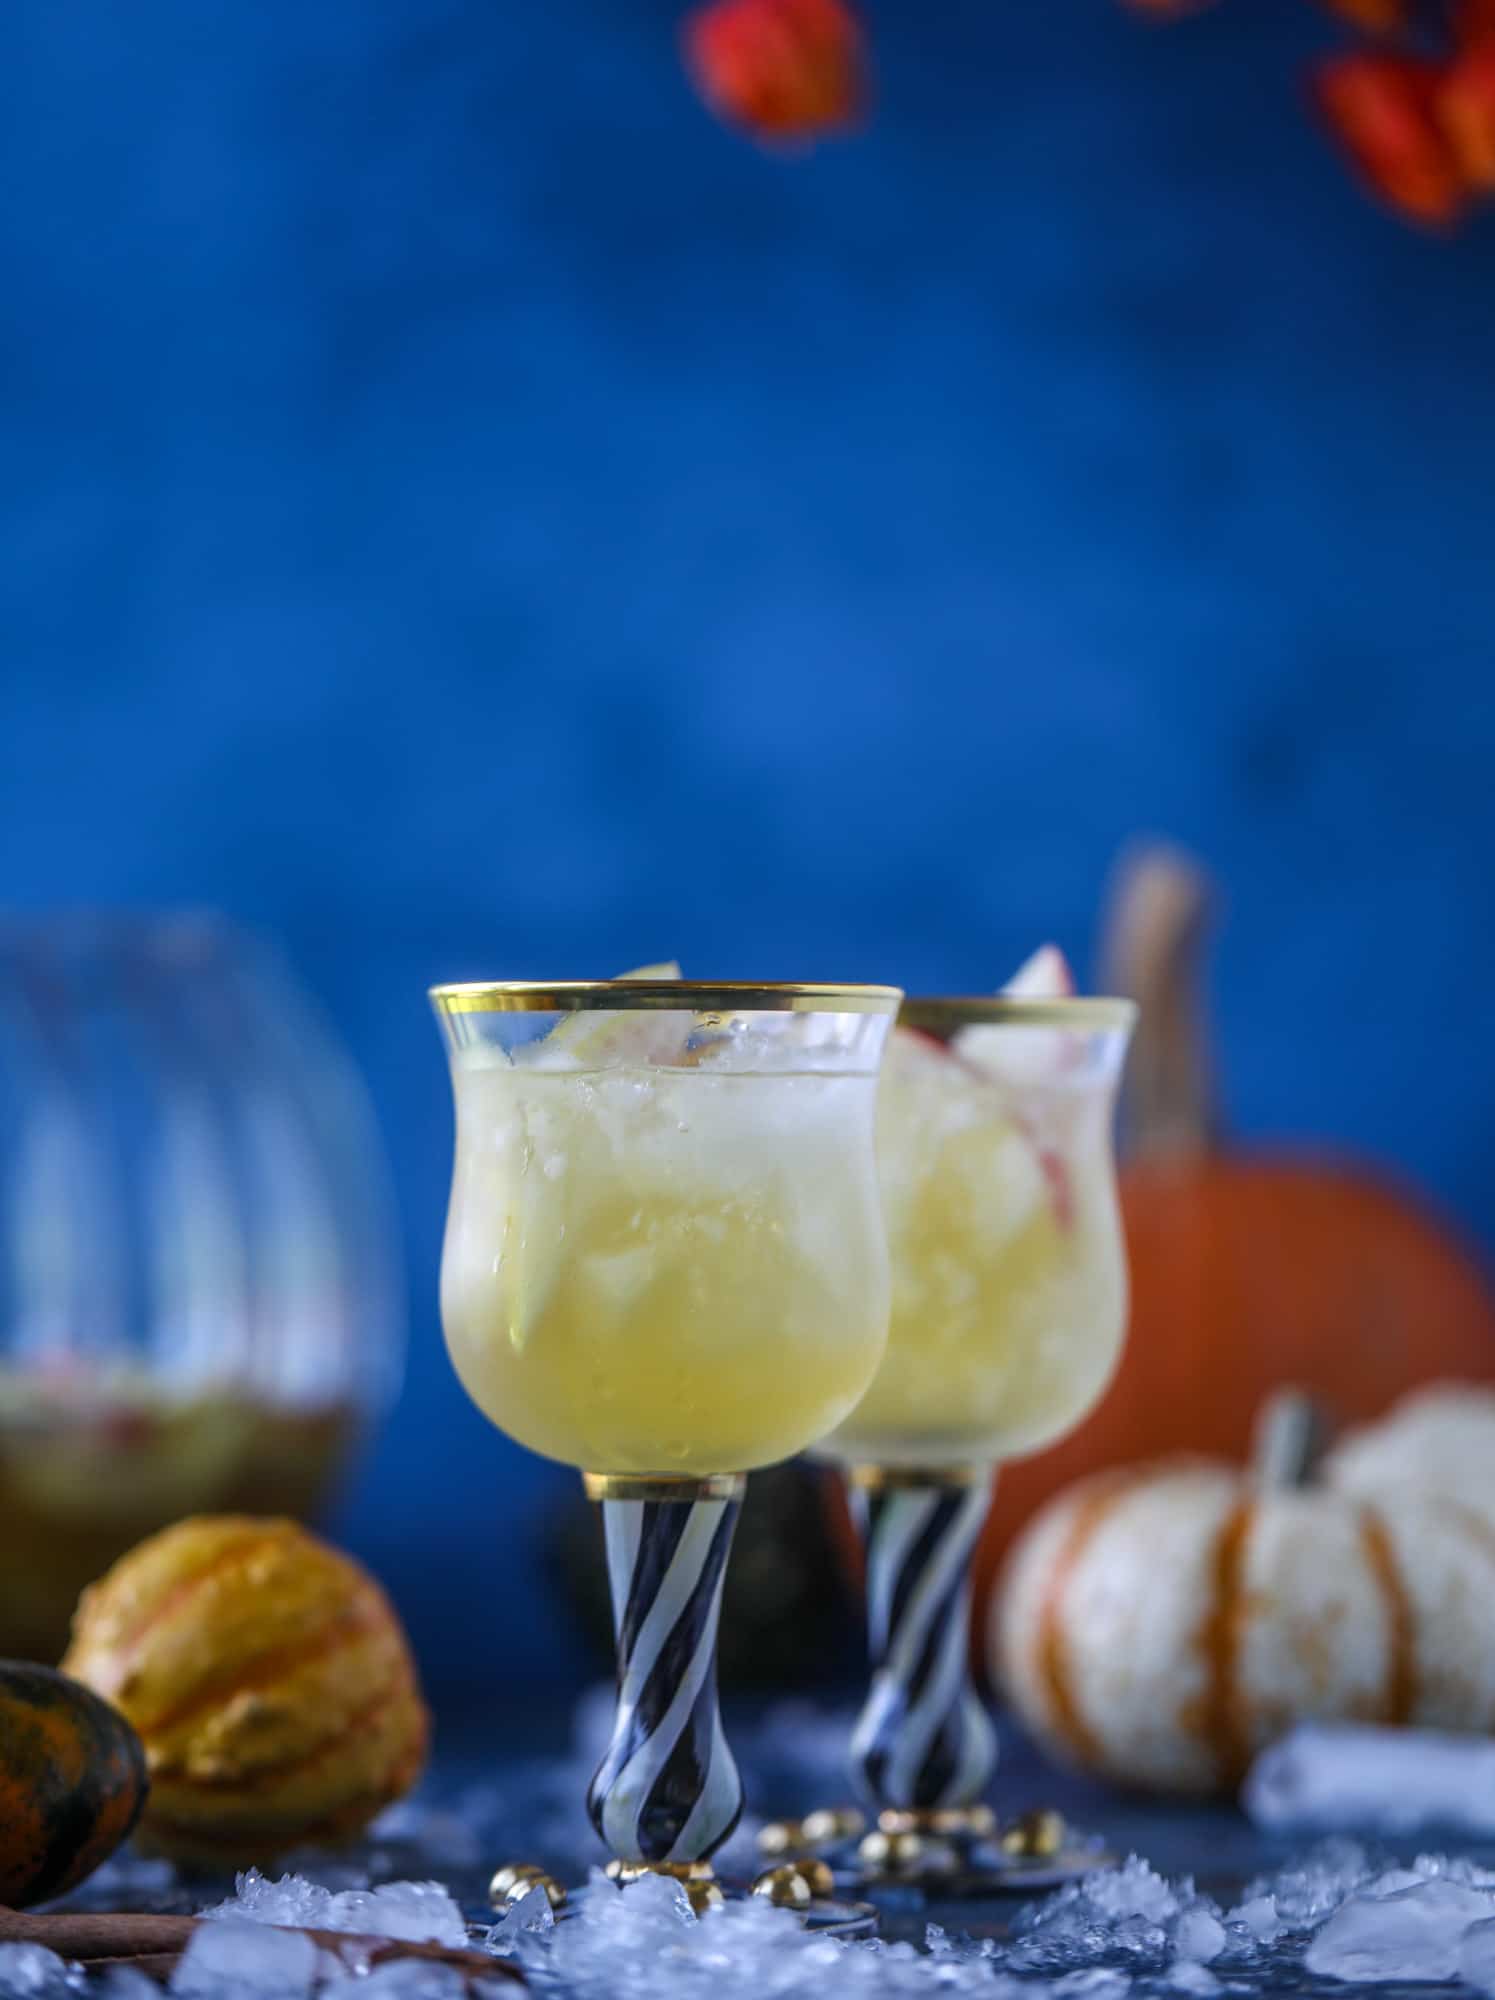 This pumpkin sangria is perfect for the fall and holiday season! A homemade pumpkin pie syrup gives the drink excellent flavor along with bubbles and apple cider and of course, boozy fruit. It's a favorite for Halloween or Thanksgiving! I howsweeteats.com #pumpkin #sangria